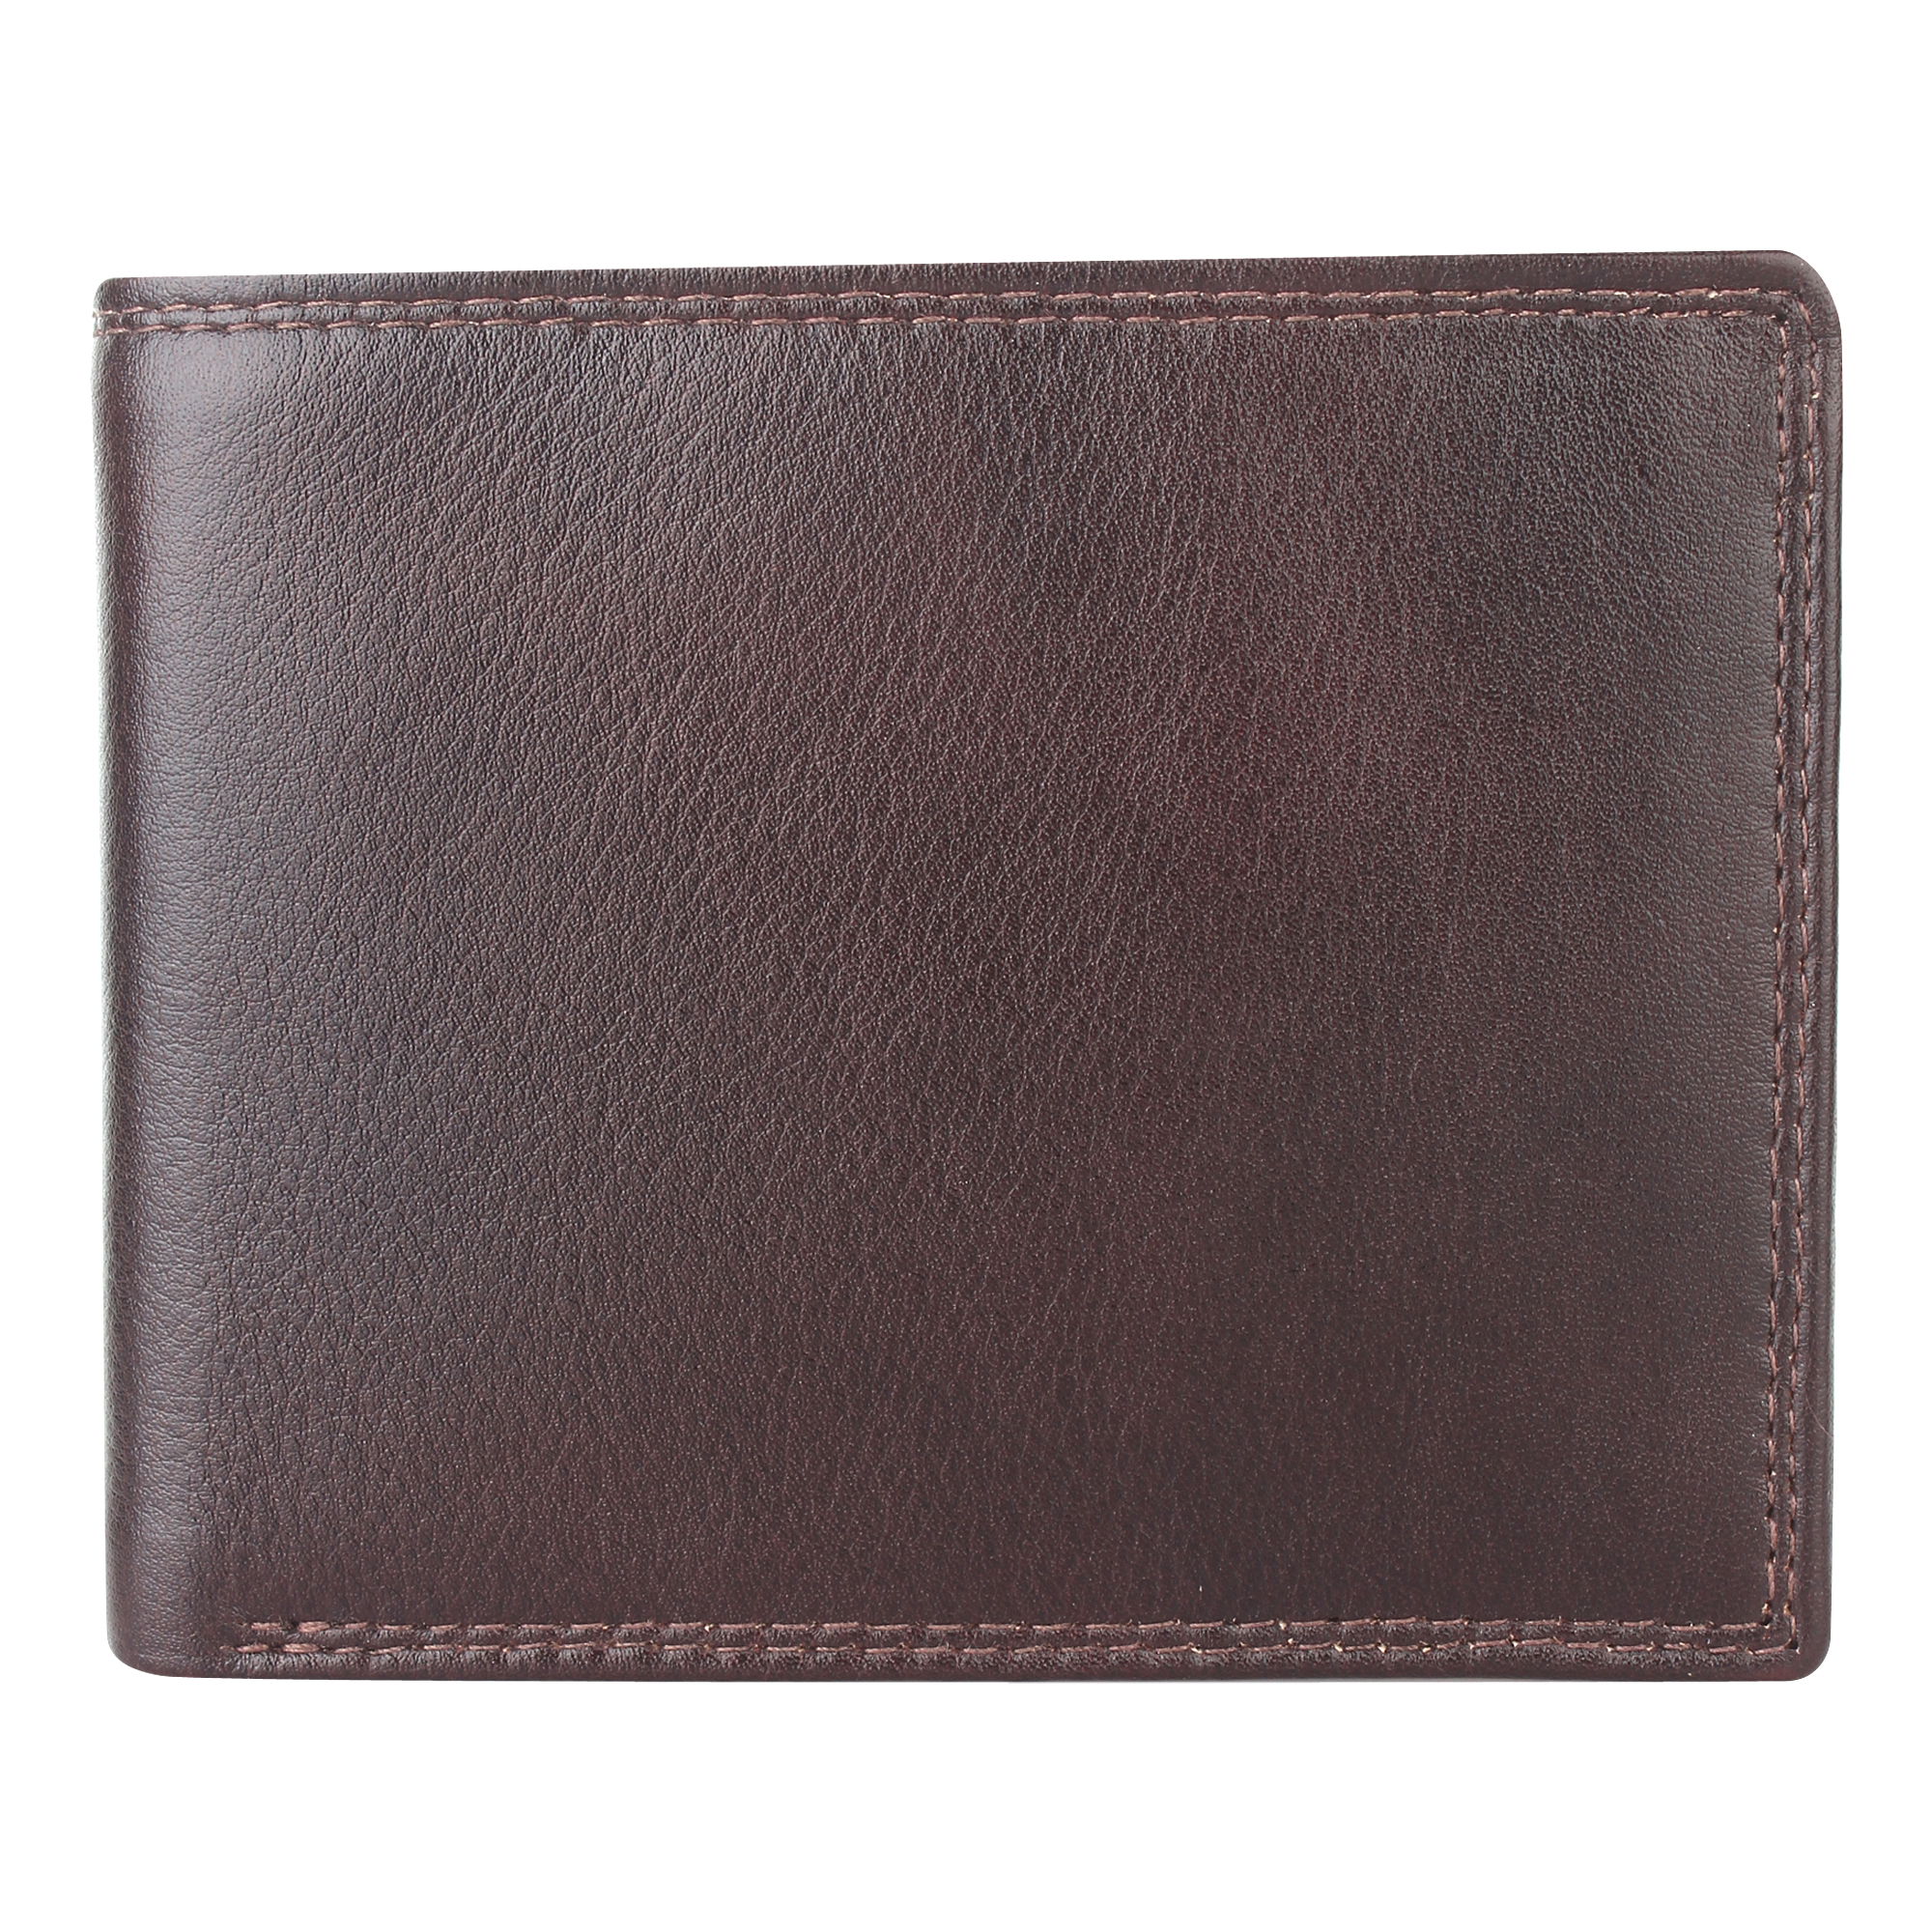 Leather Wallets Manufacturers in Mexico, Leather Wallets Suppliers in Mexico, Leather Wallets Wholesalers in Mexico, Leather Wallets Traders in Mexico, custom leather wallet manufacturers in Mexico, Leathe